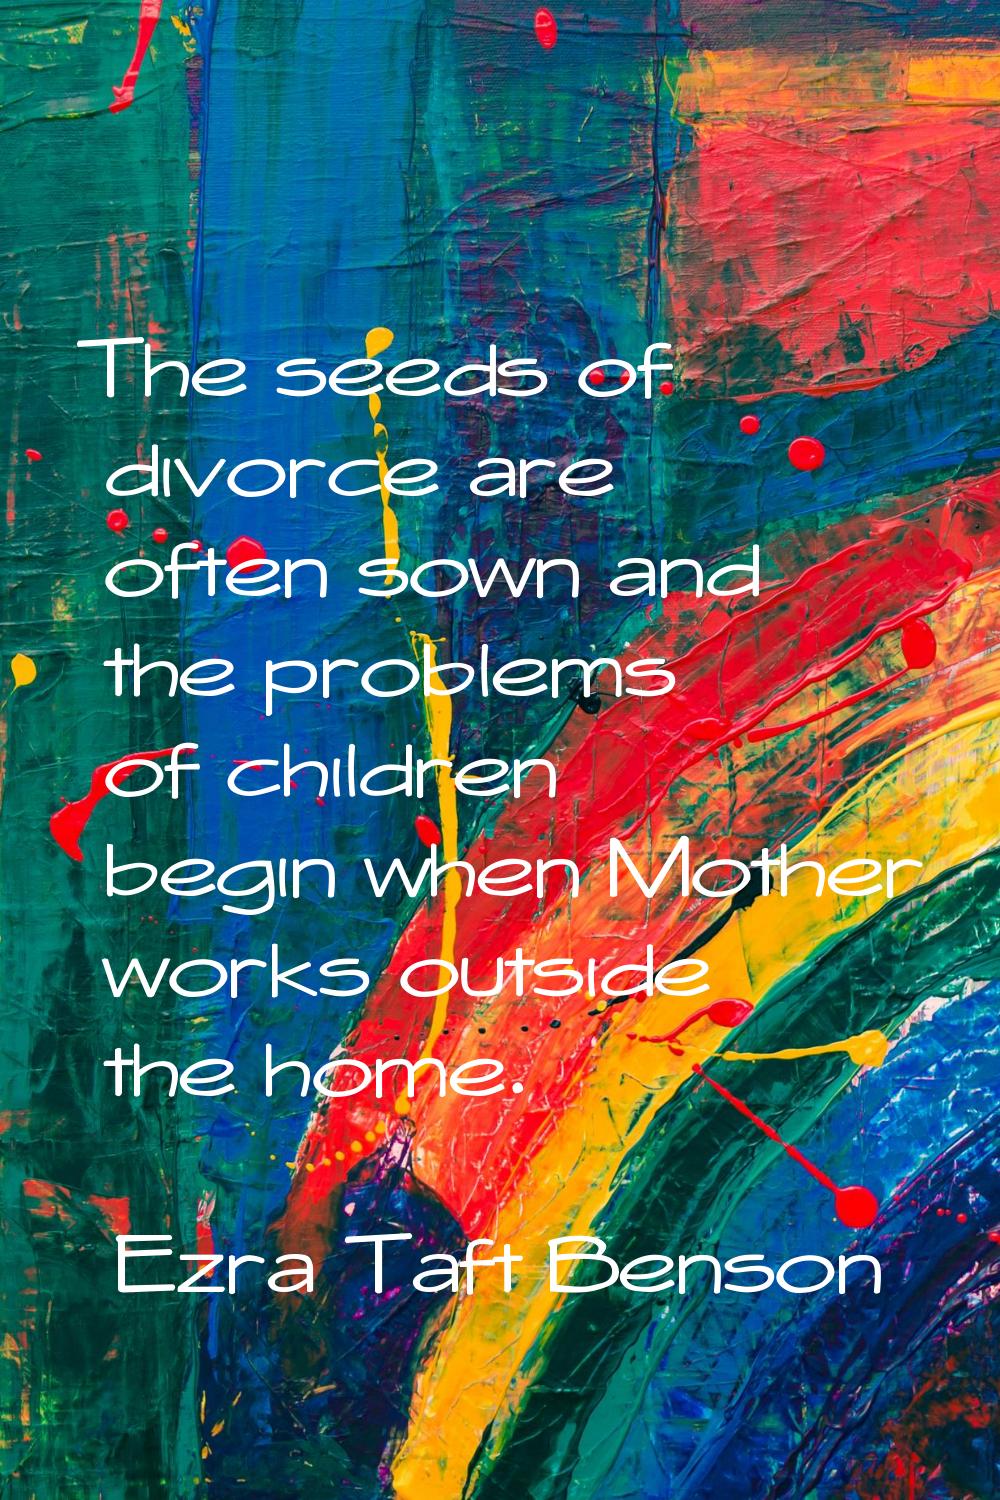 The seeds of divorce are often sown and the problems of children begin when Mother works outside th